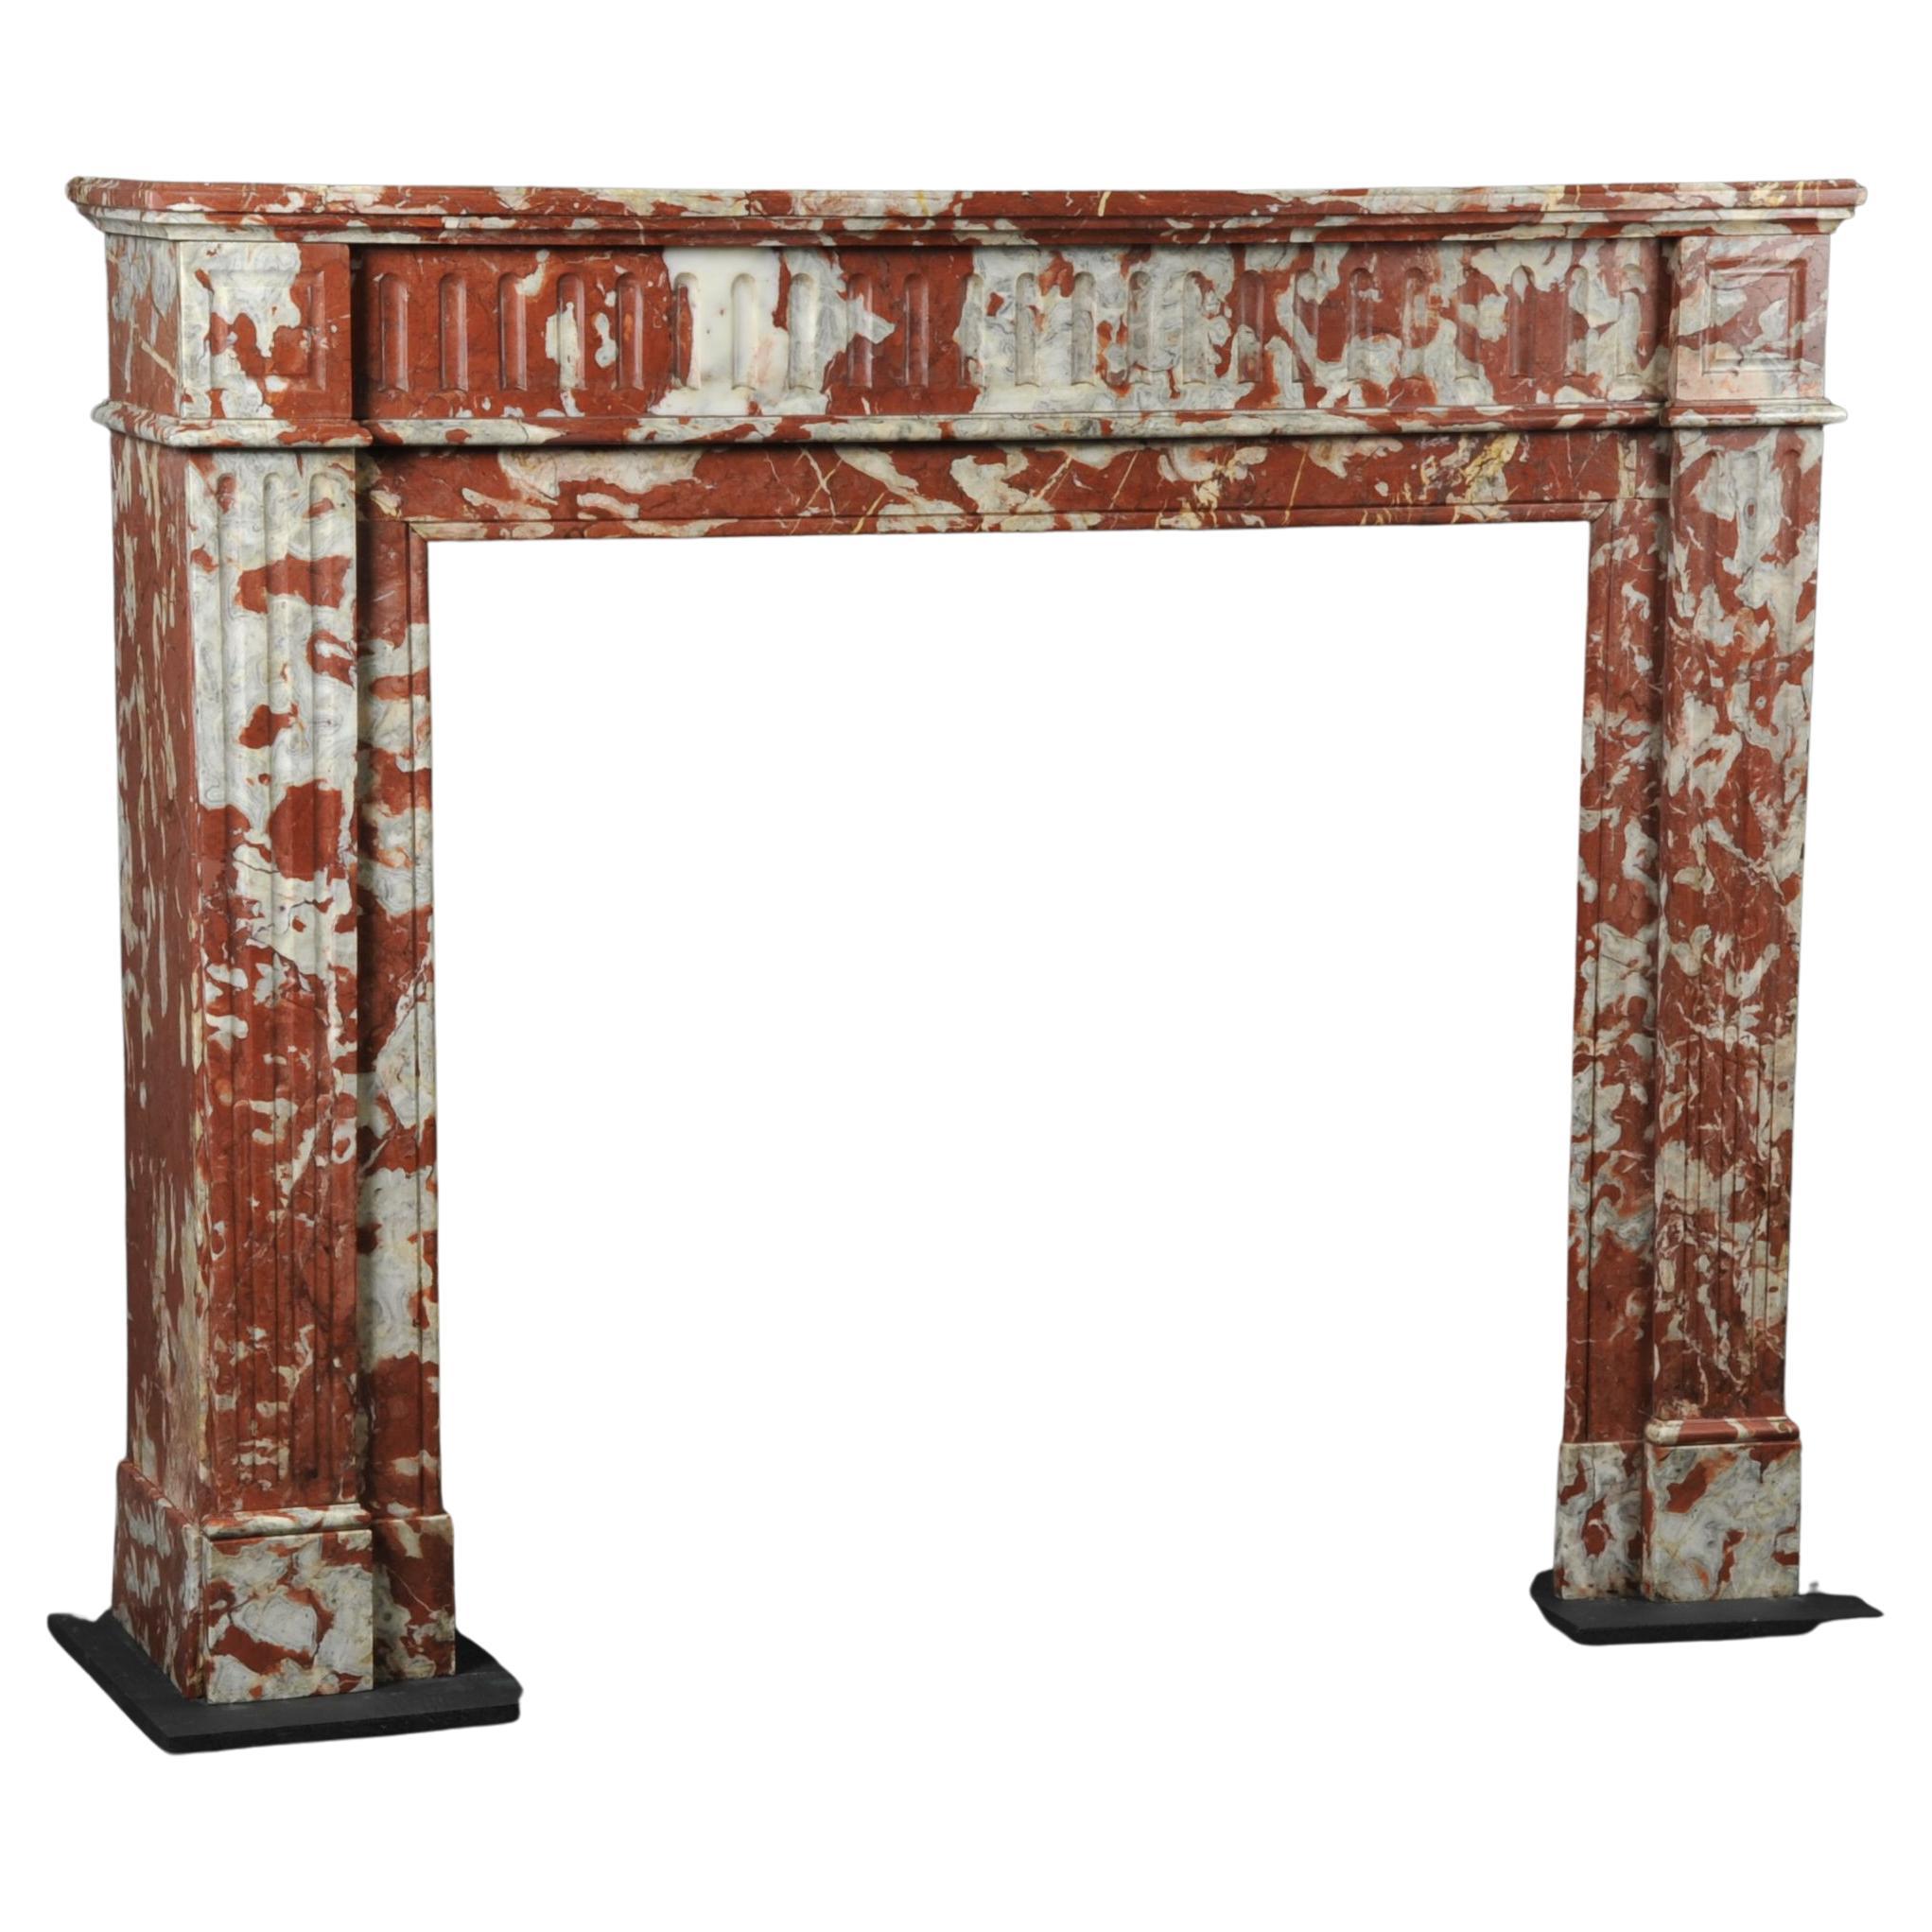 Louis XVI Style Fireplace In Red Marble From Languedoc